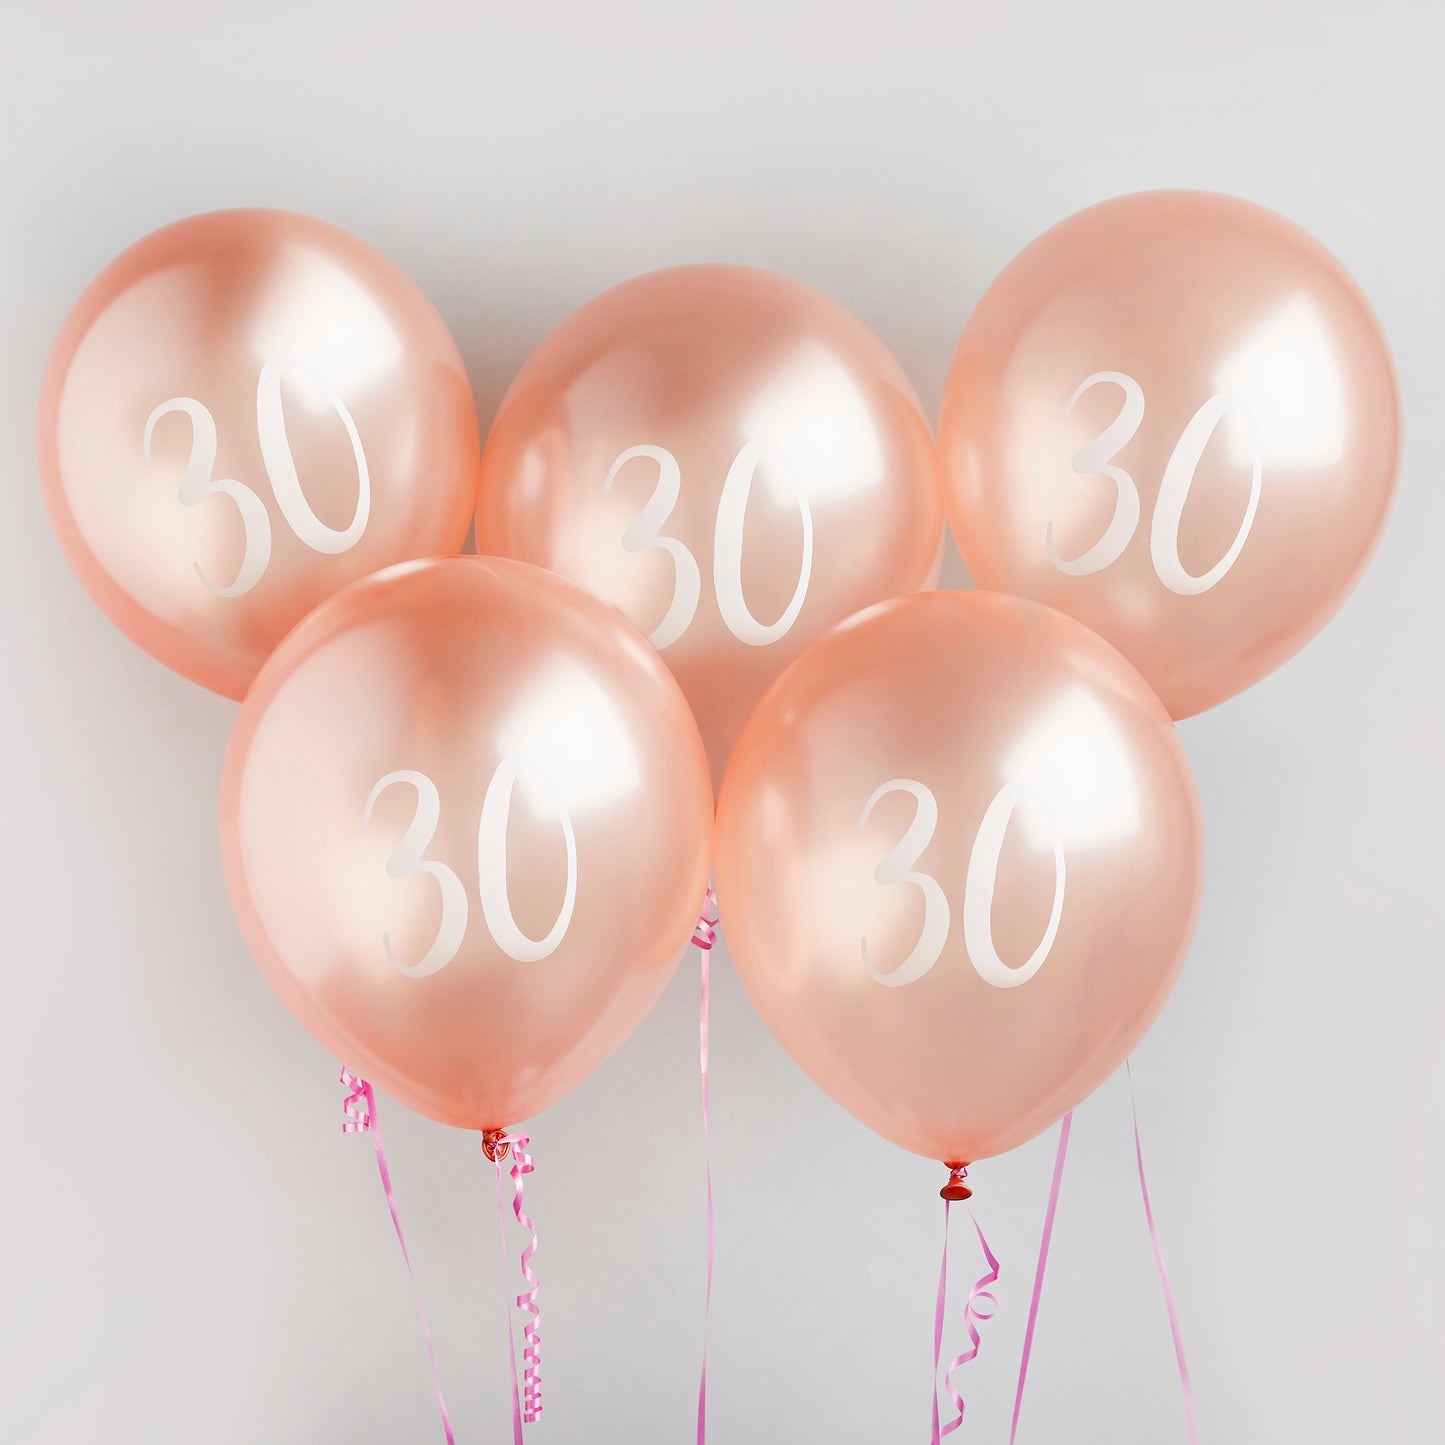 Hootyballoo 5 Pack Rose Gold Number '30' Balloons Birthday Partyware